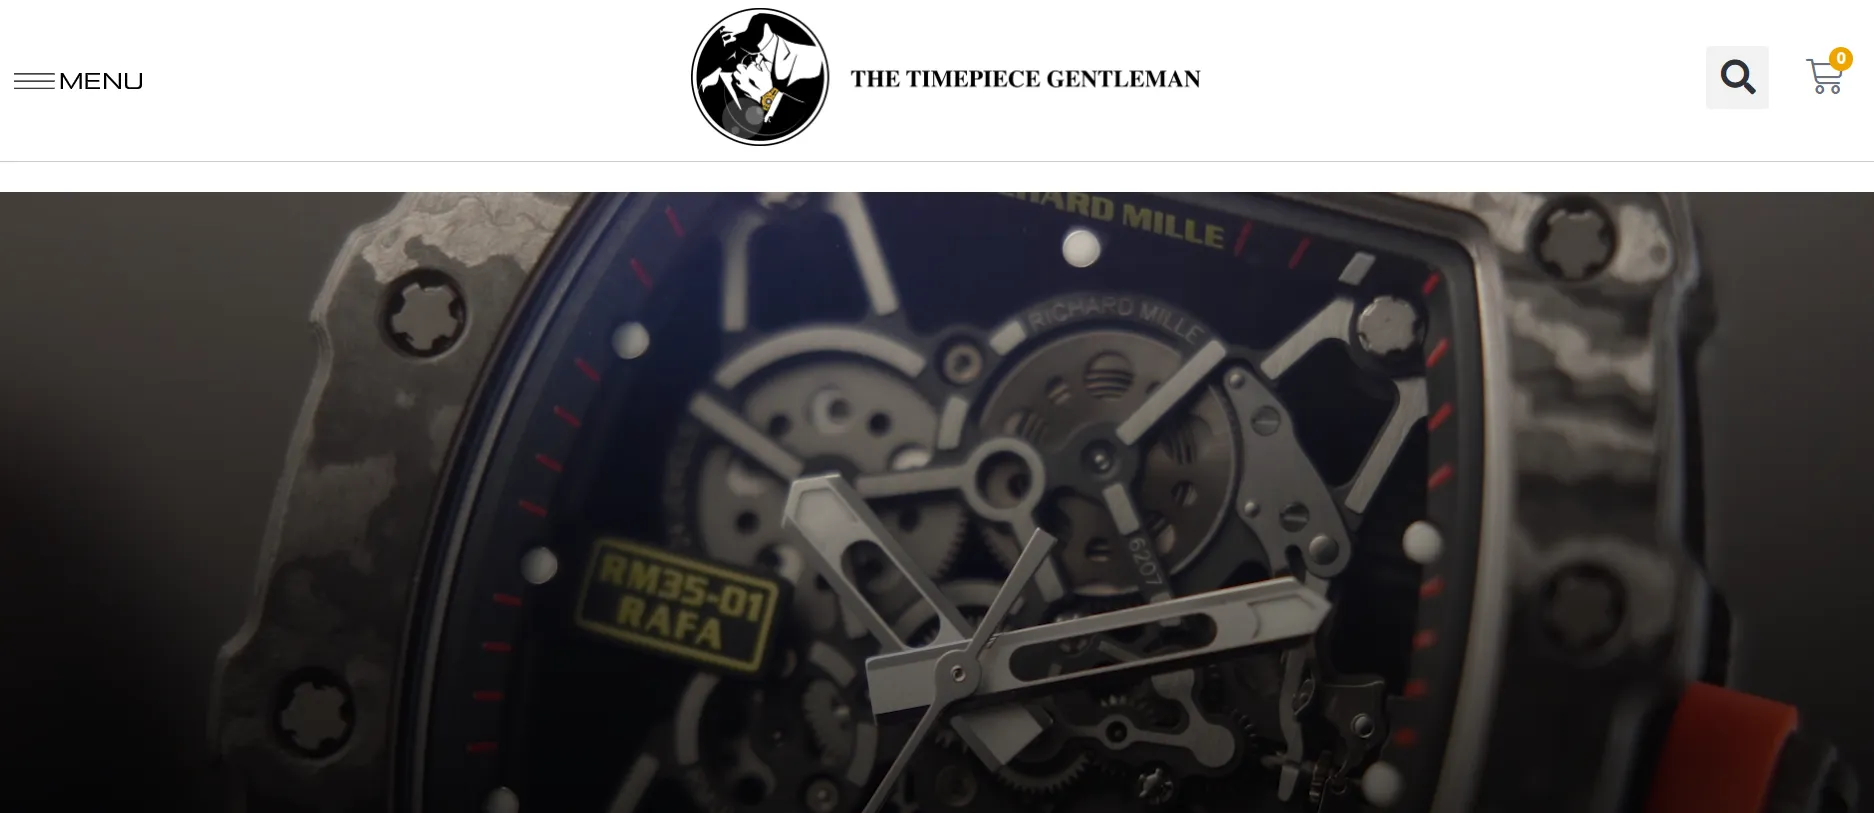 Read more about the article Anthony Farrer Scam- The Timepiece Gentleman Scandal